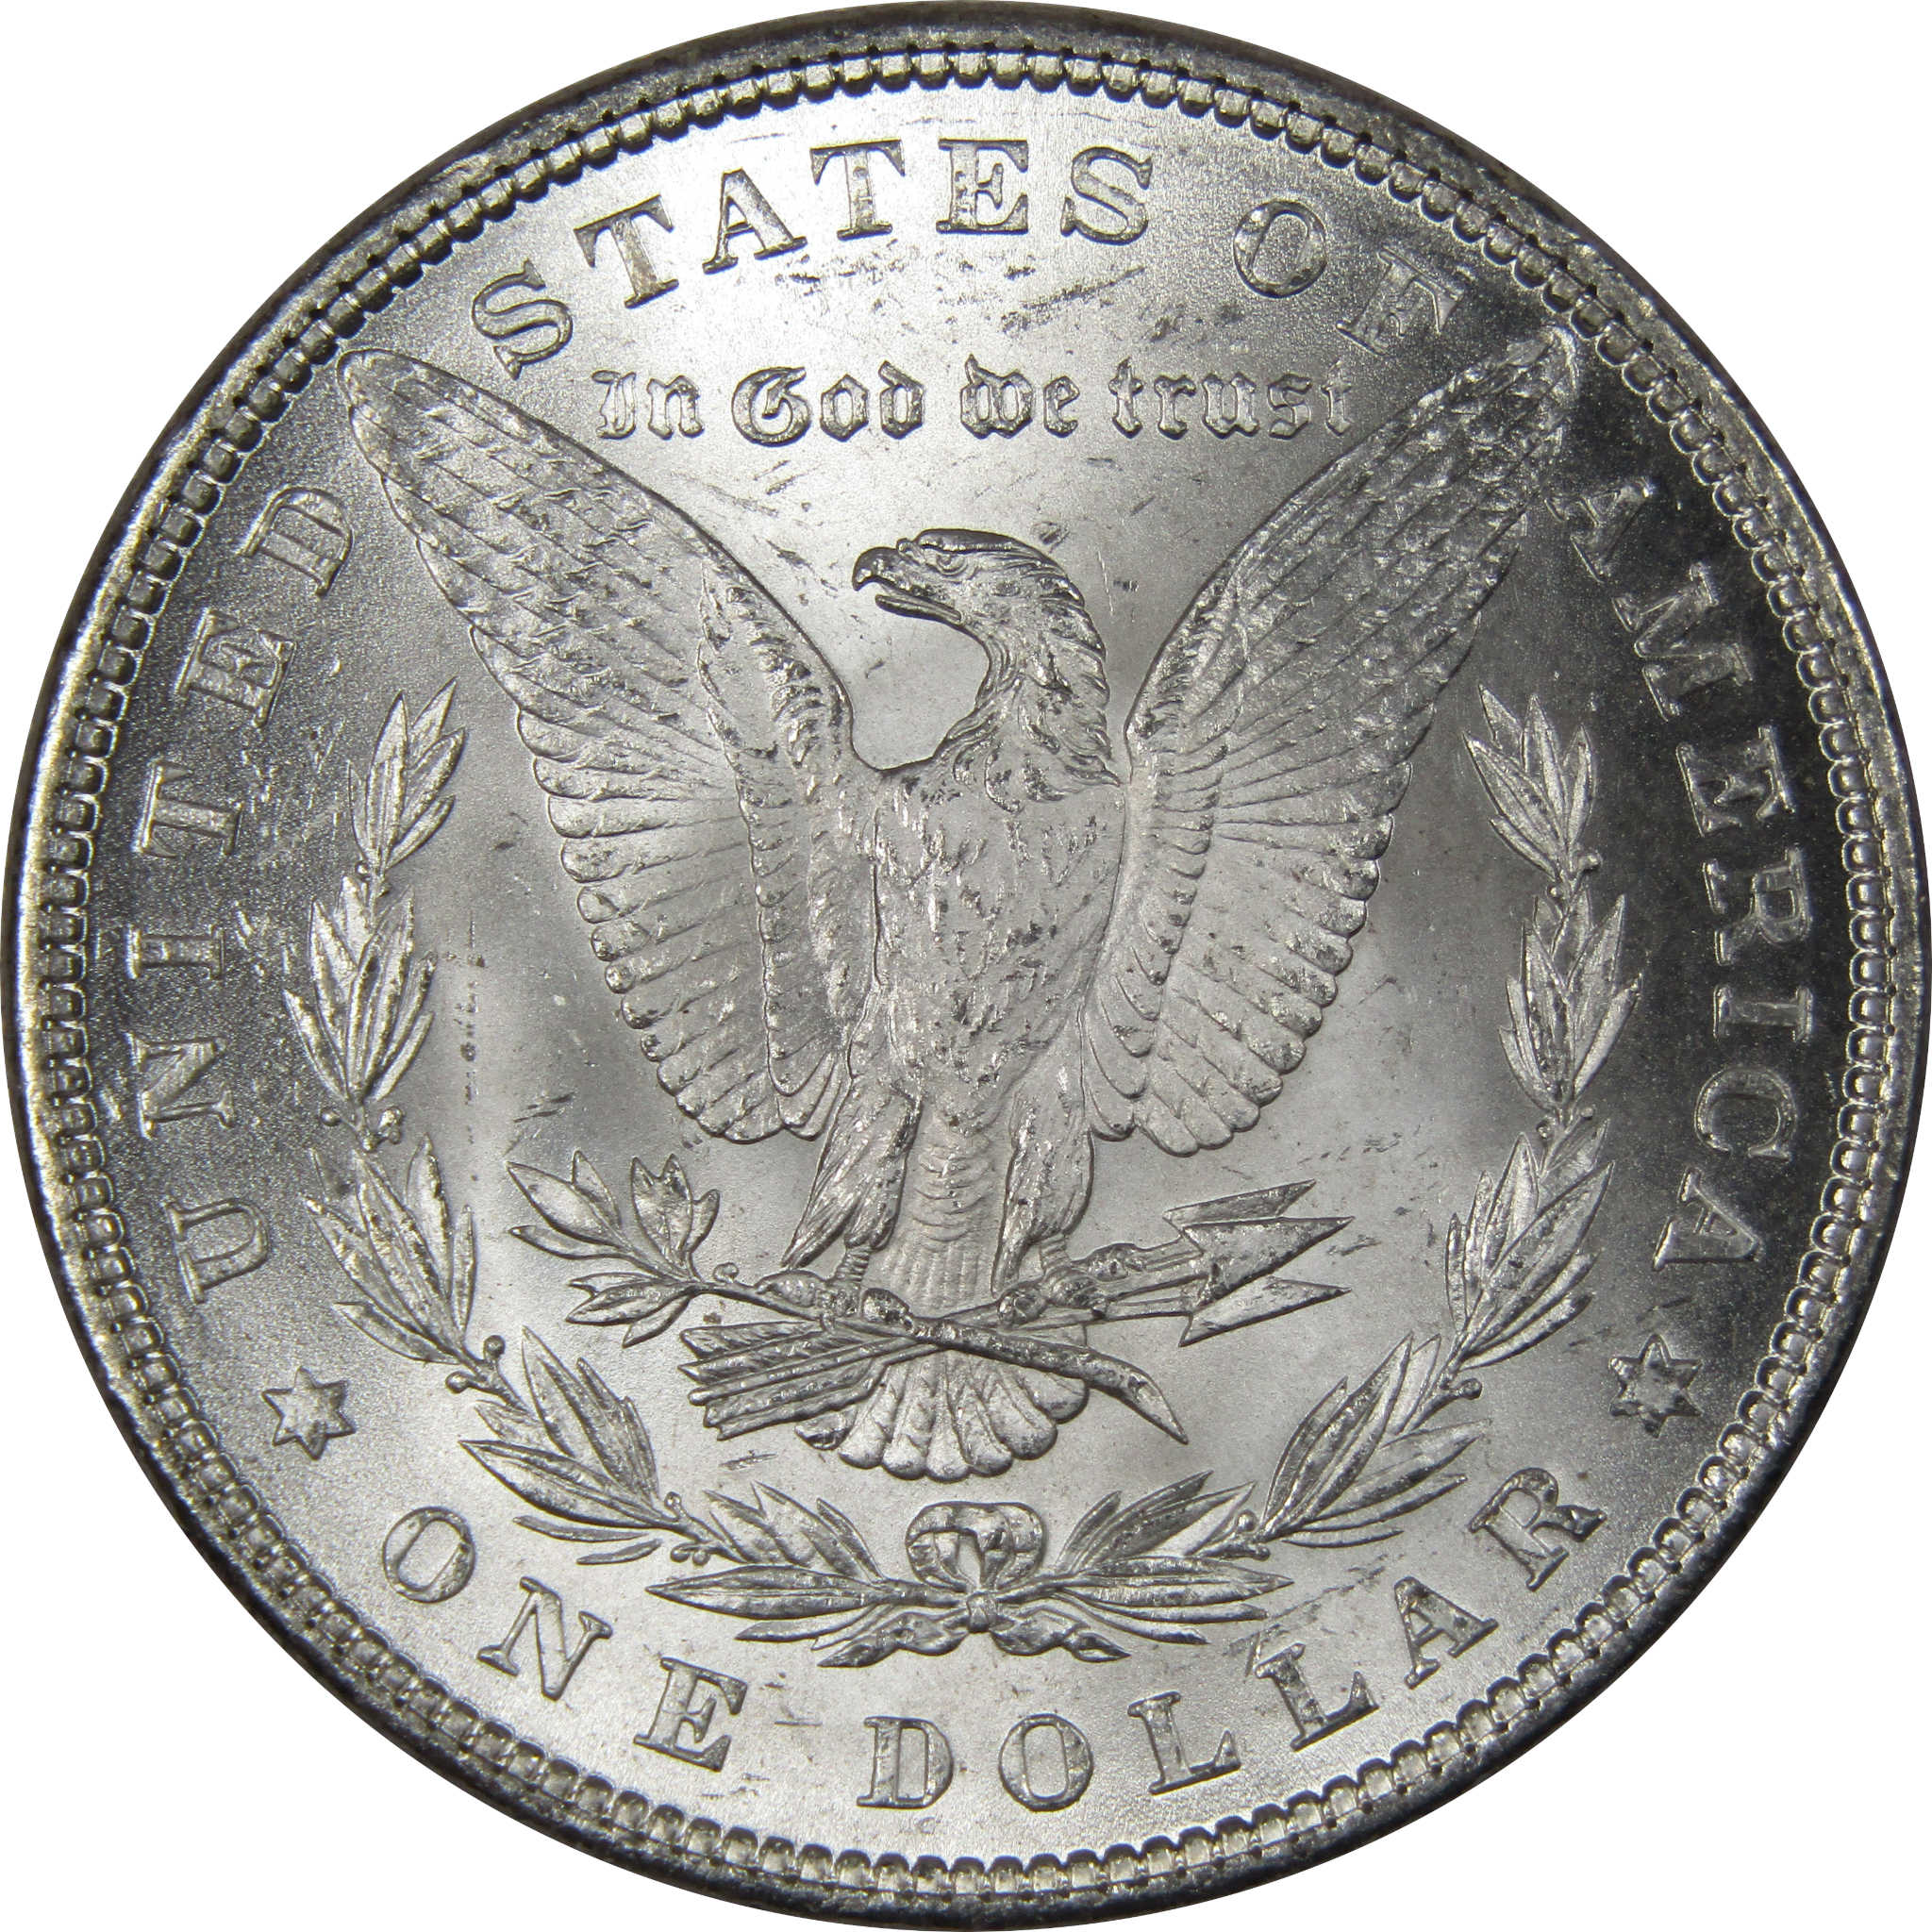 1882 Morgan Dollar BU Uncirculated Mint State 90% Silver SKU:IPC9717 - Morgan coin - Morgan silver dollar - Morgan silver dollar for sale - Profile Coins &amp; Collectibles